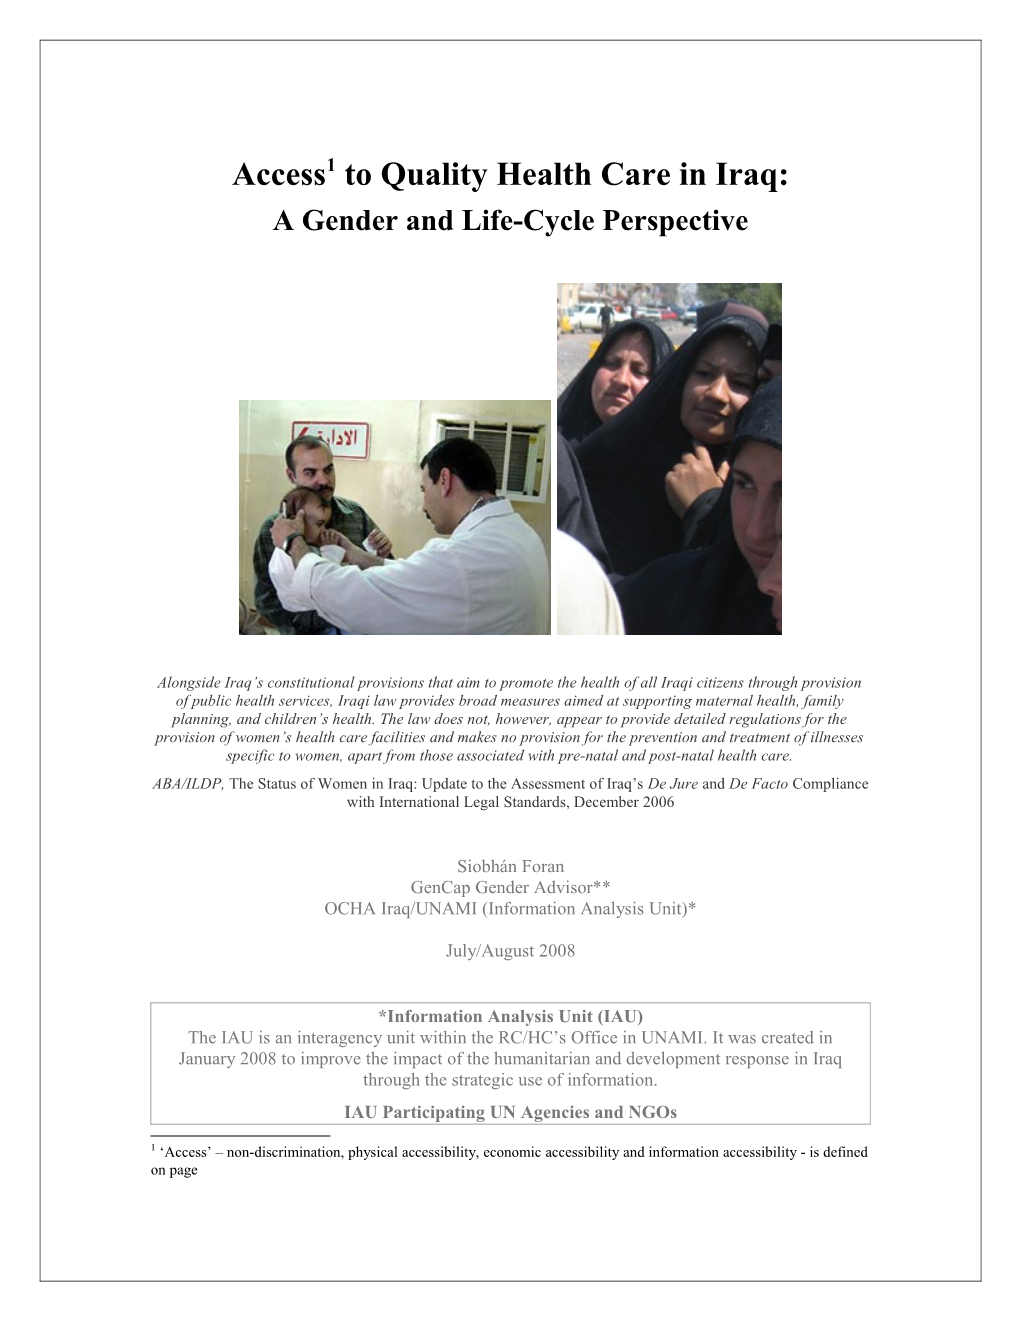 Access to Quality Health Care in Iraq - a Gender and Life-Cycle Perspective